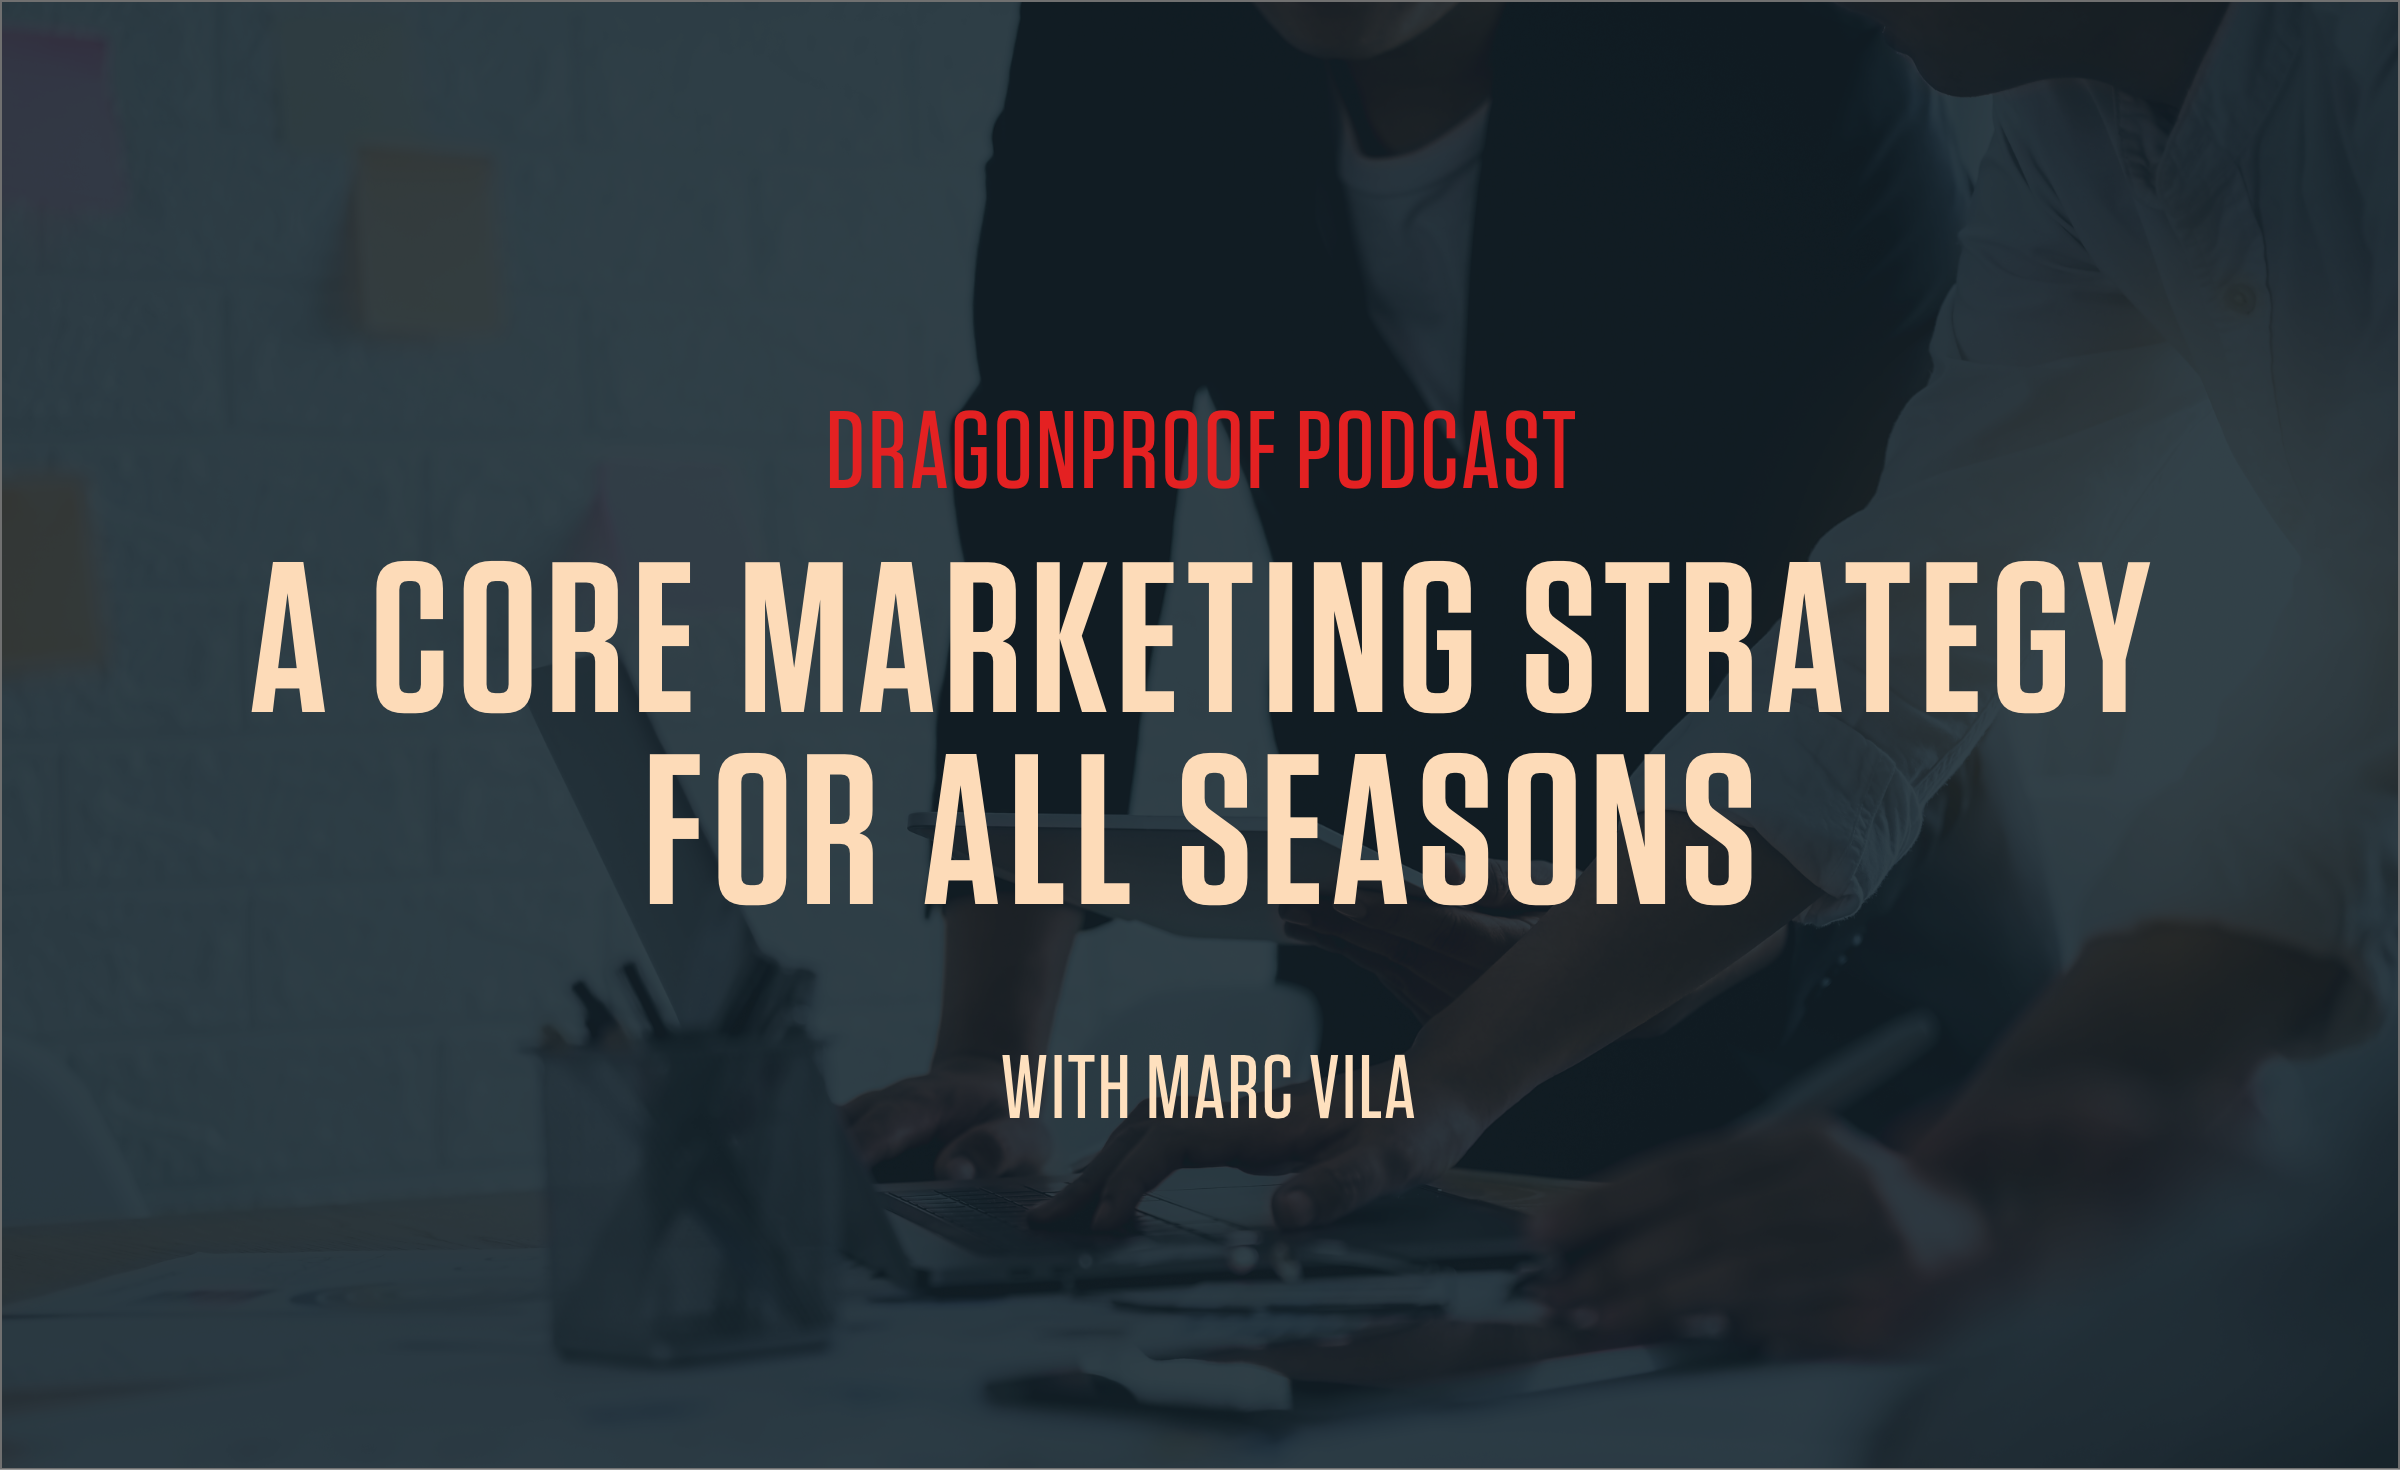 Dragonproof Podcast - A Core Marketing Strategy For All Seasons with Marc Villa